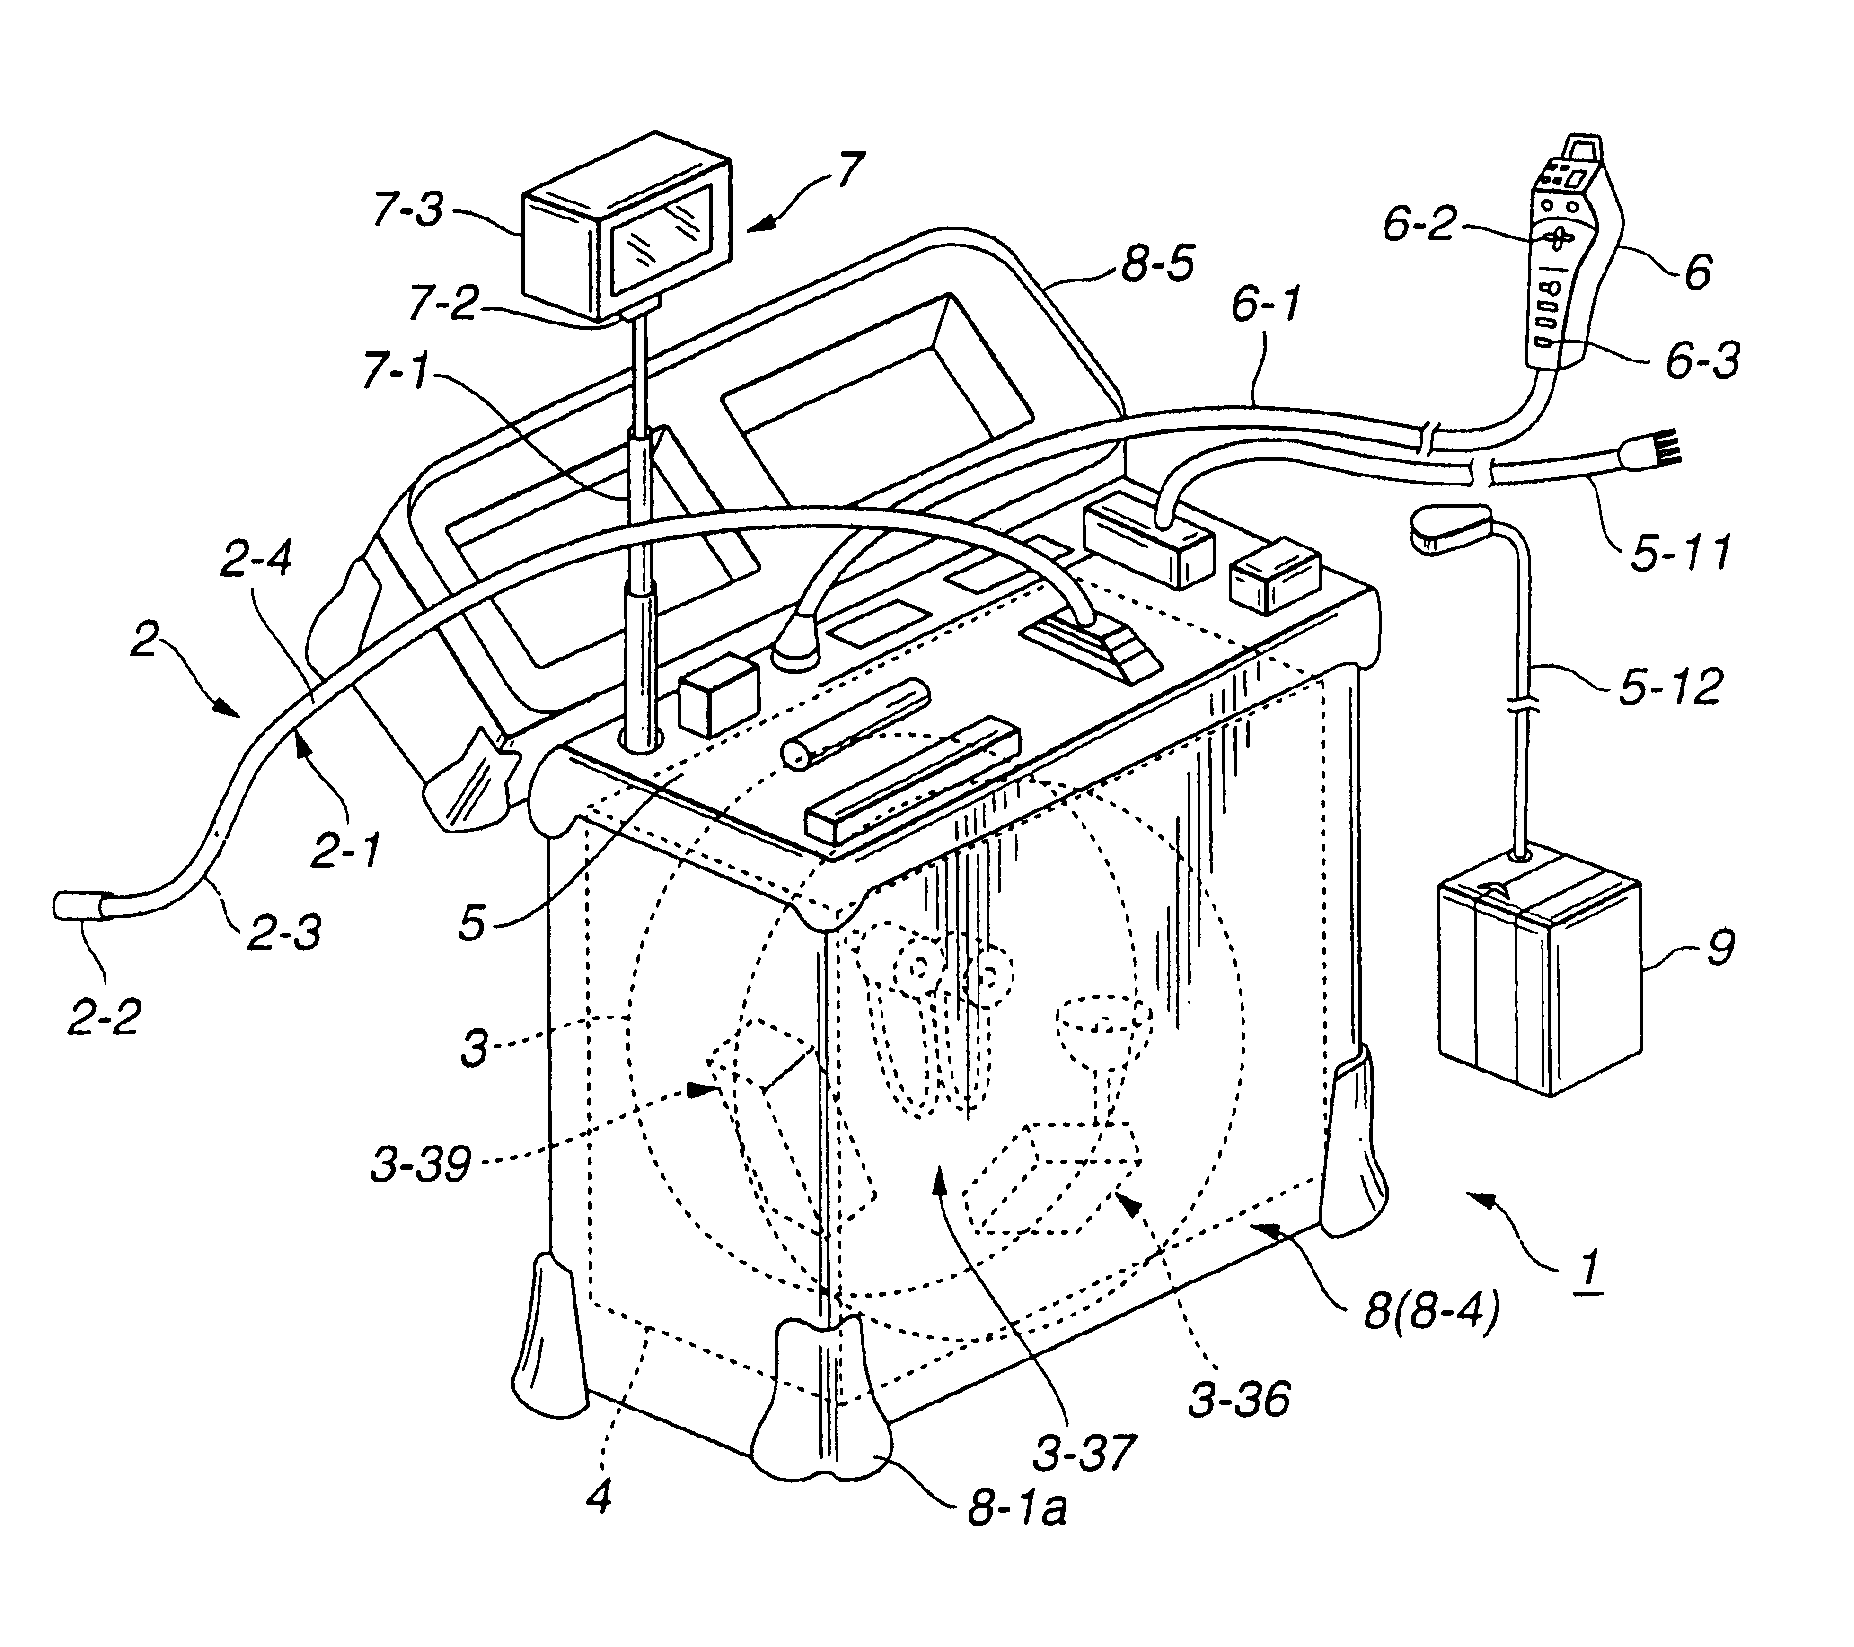 Endoscope apparatus with drum part to wind insertion part therearound